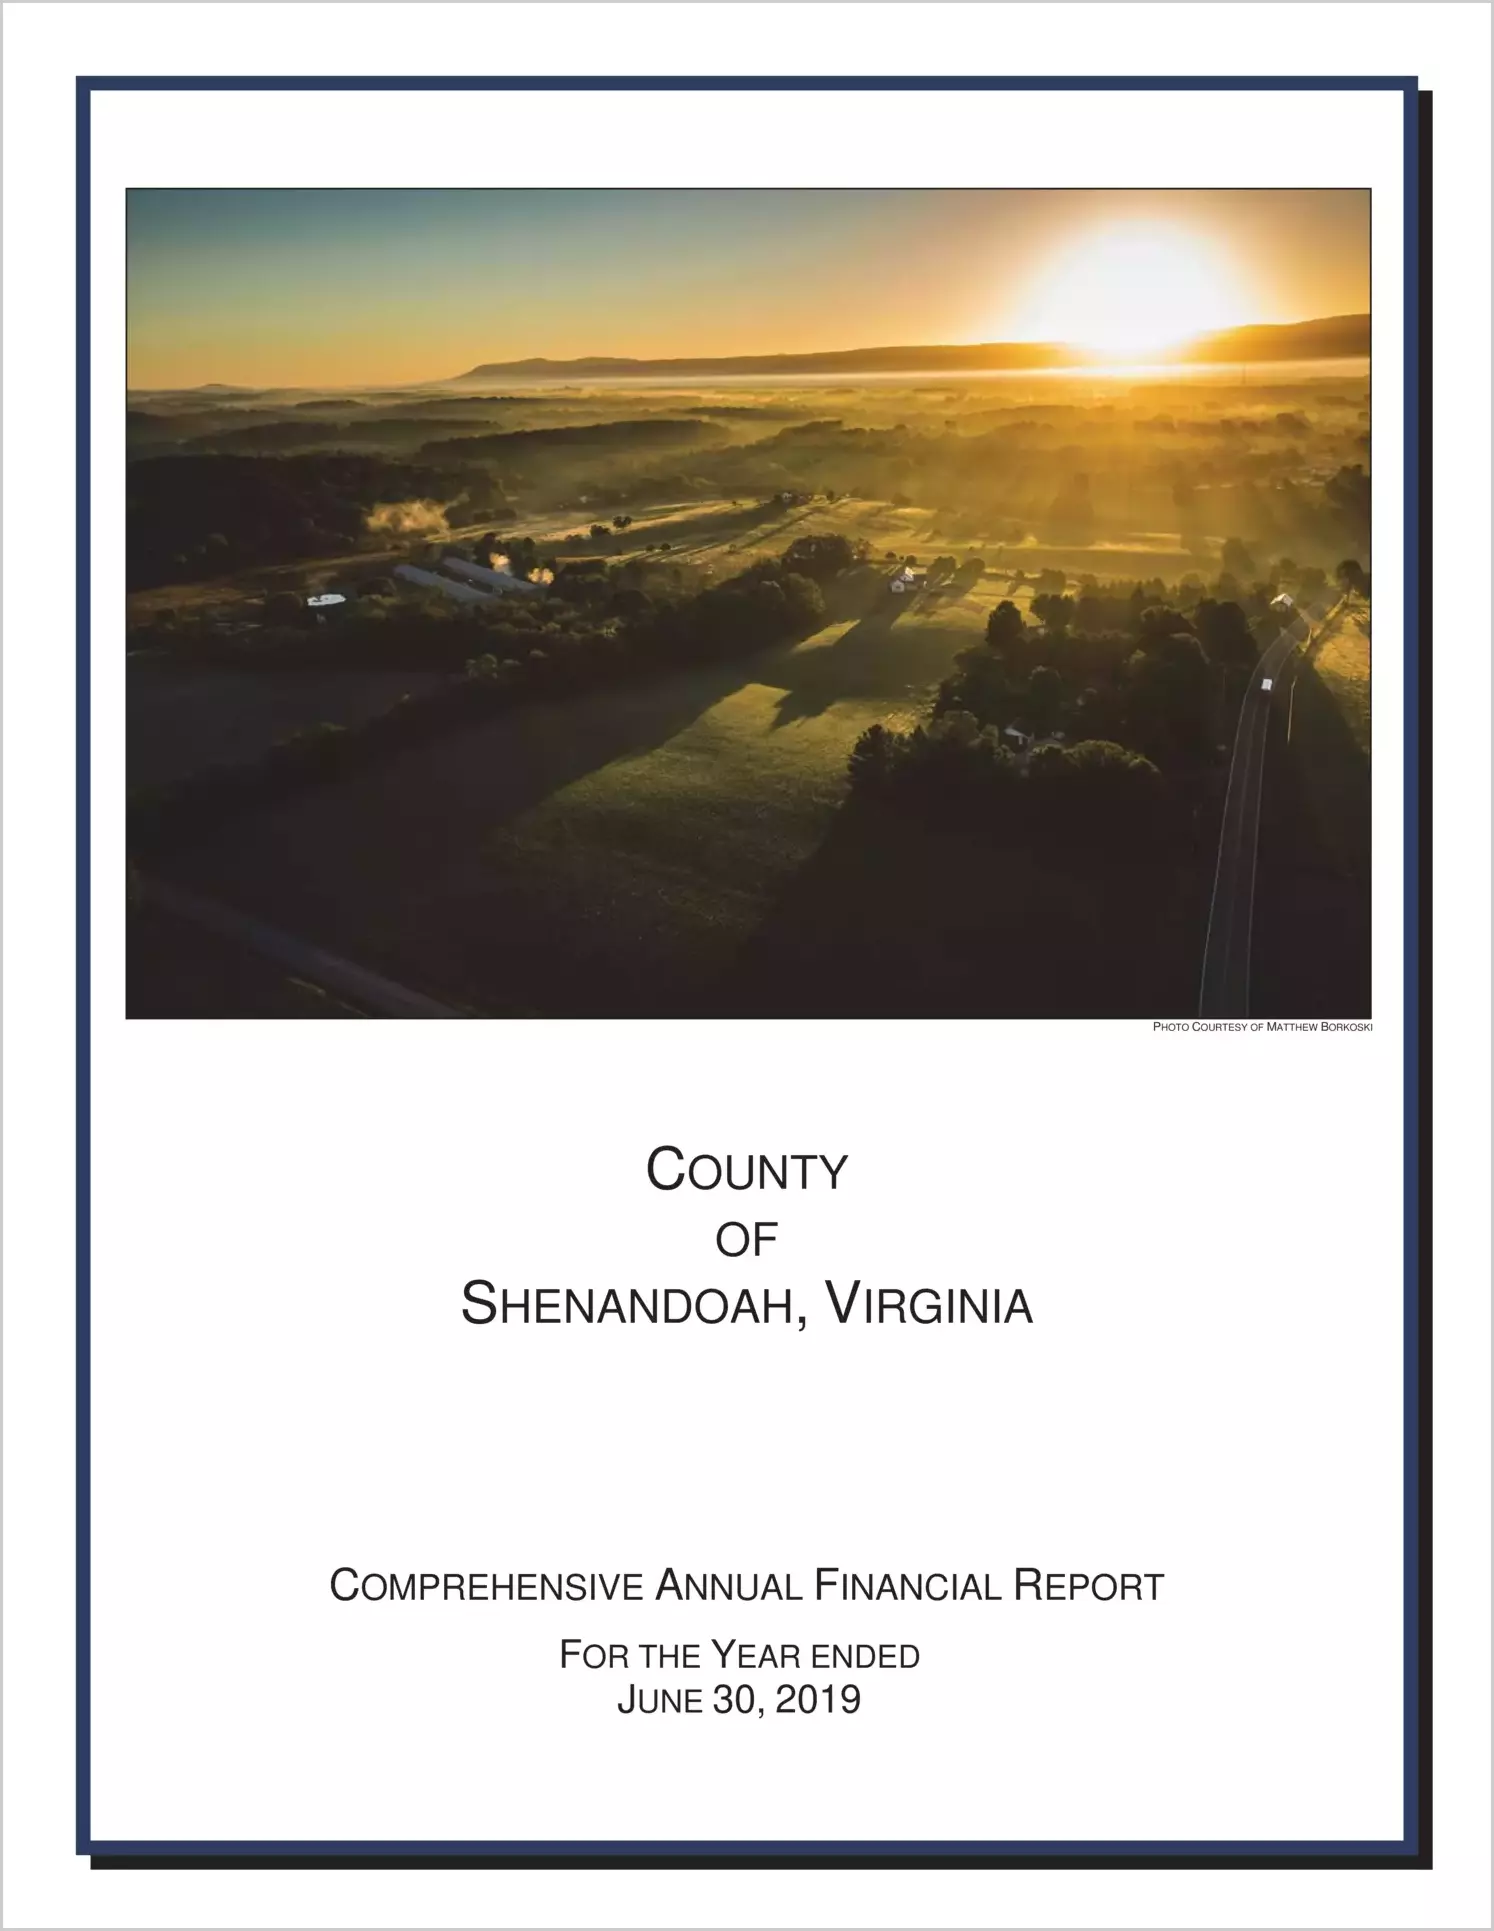 2019 Annual Financial Report for County of Shenandoah